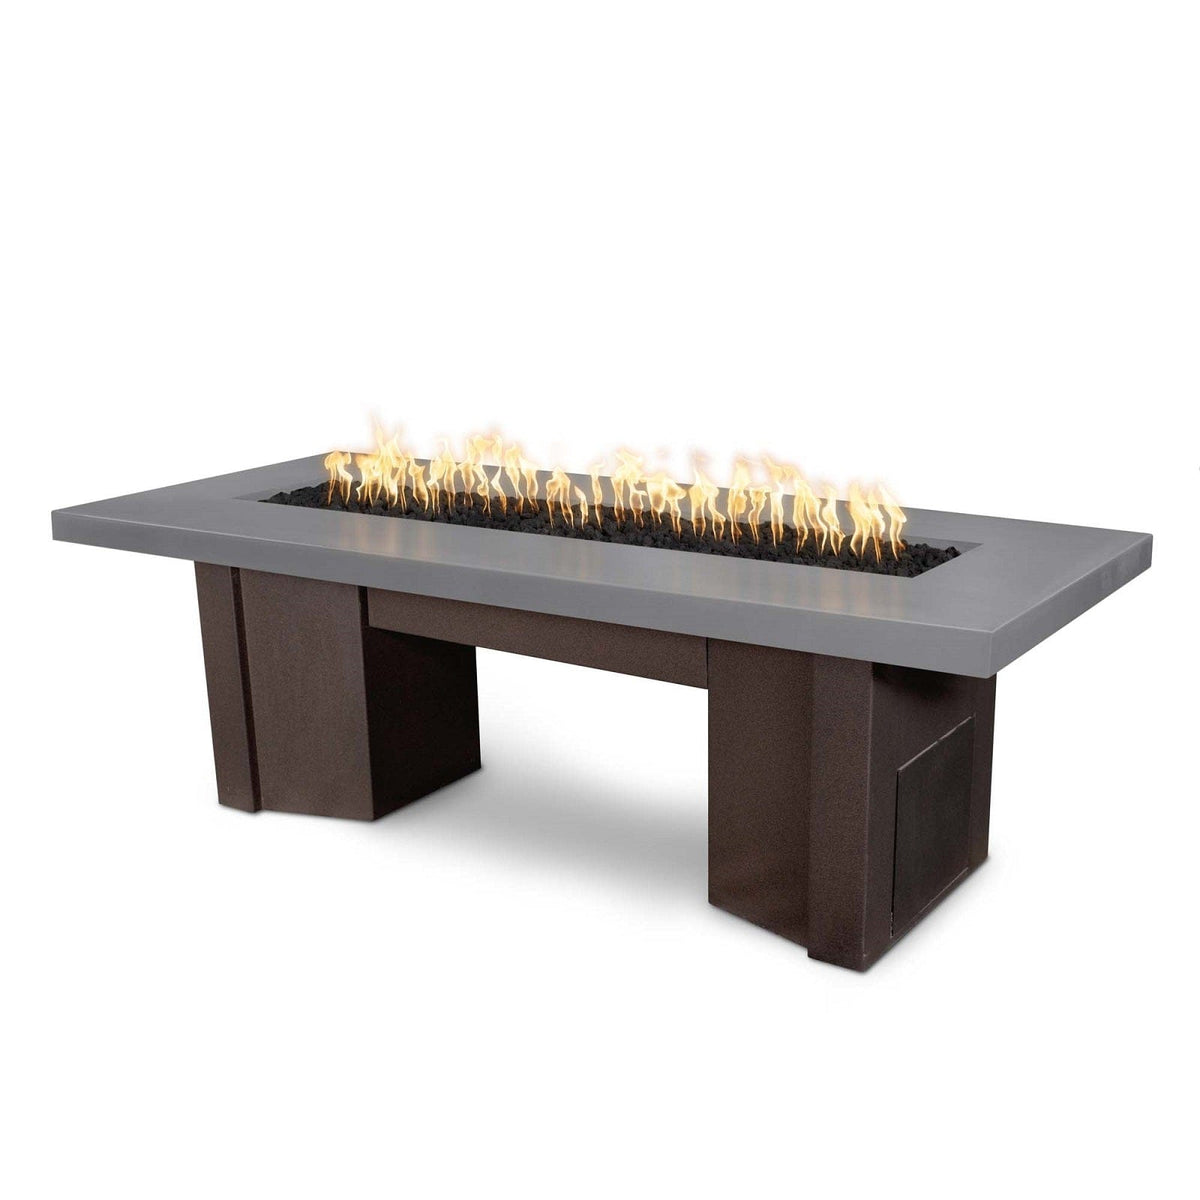 The Outdoor Plus Fire Features Natural Gray (-NGY) / Java Powder Coated Steel (-JAV) The Outdoor Plus 78&quot; Alameda Fire Table Smooth Concrete in Natural Gas - 110V Plug &amp; Play Electronic Ignition / OPT-ALMGFRC78EKIT-NG